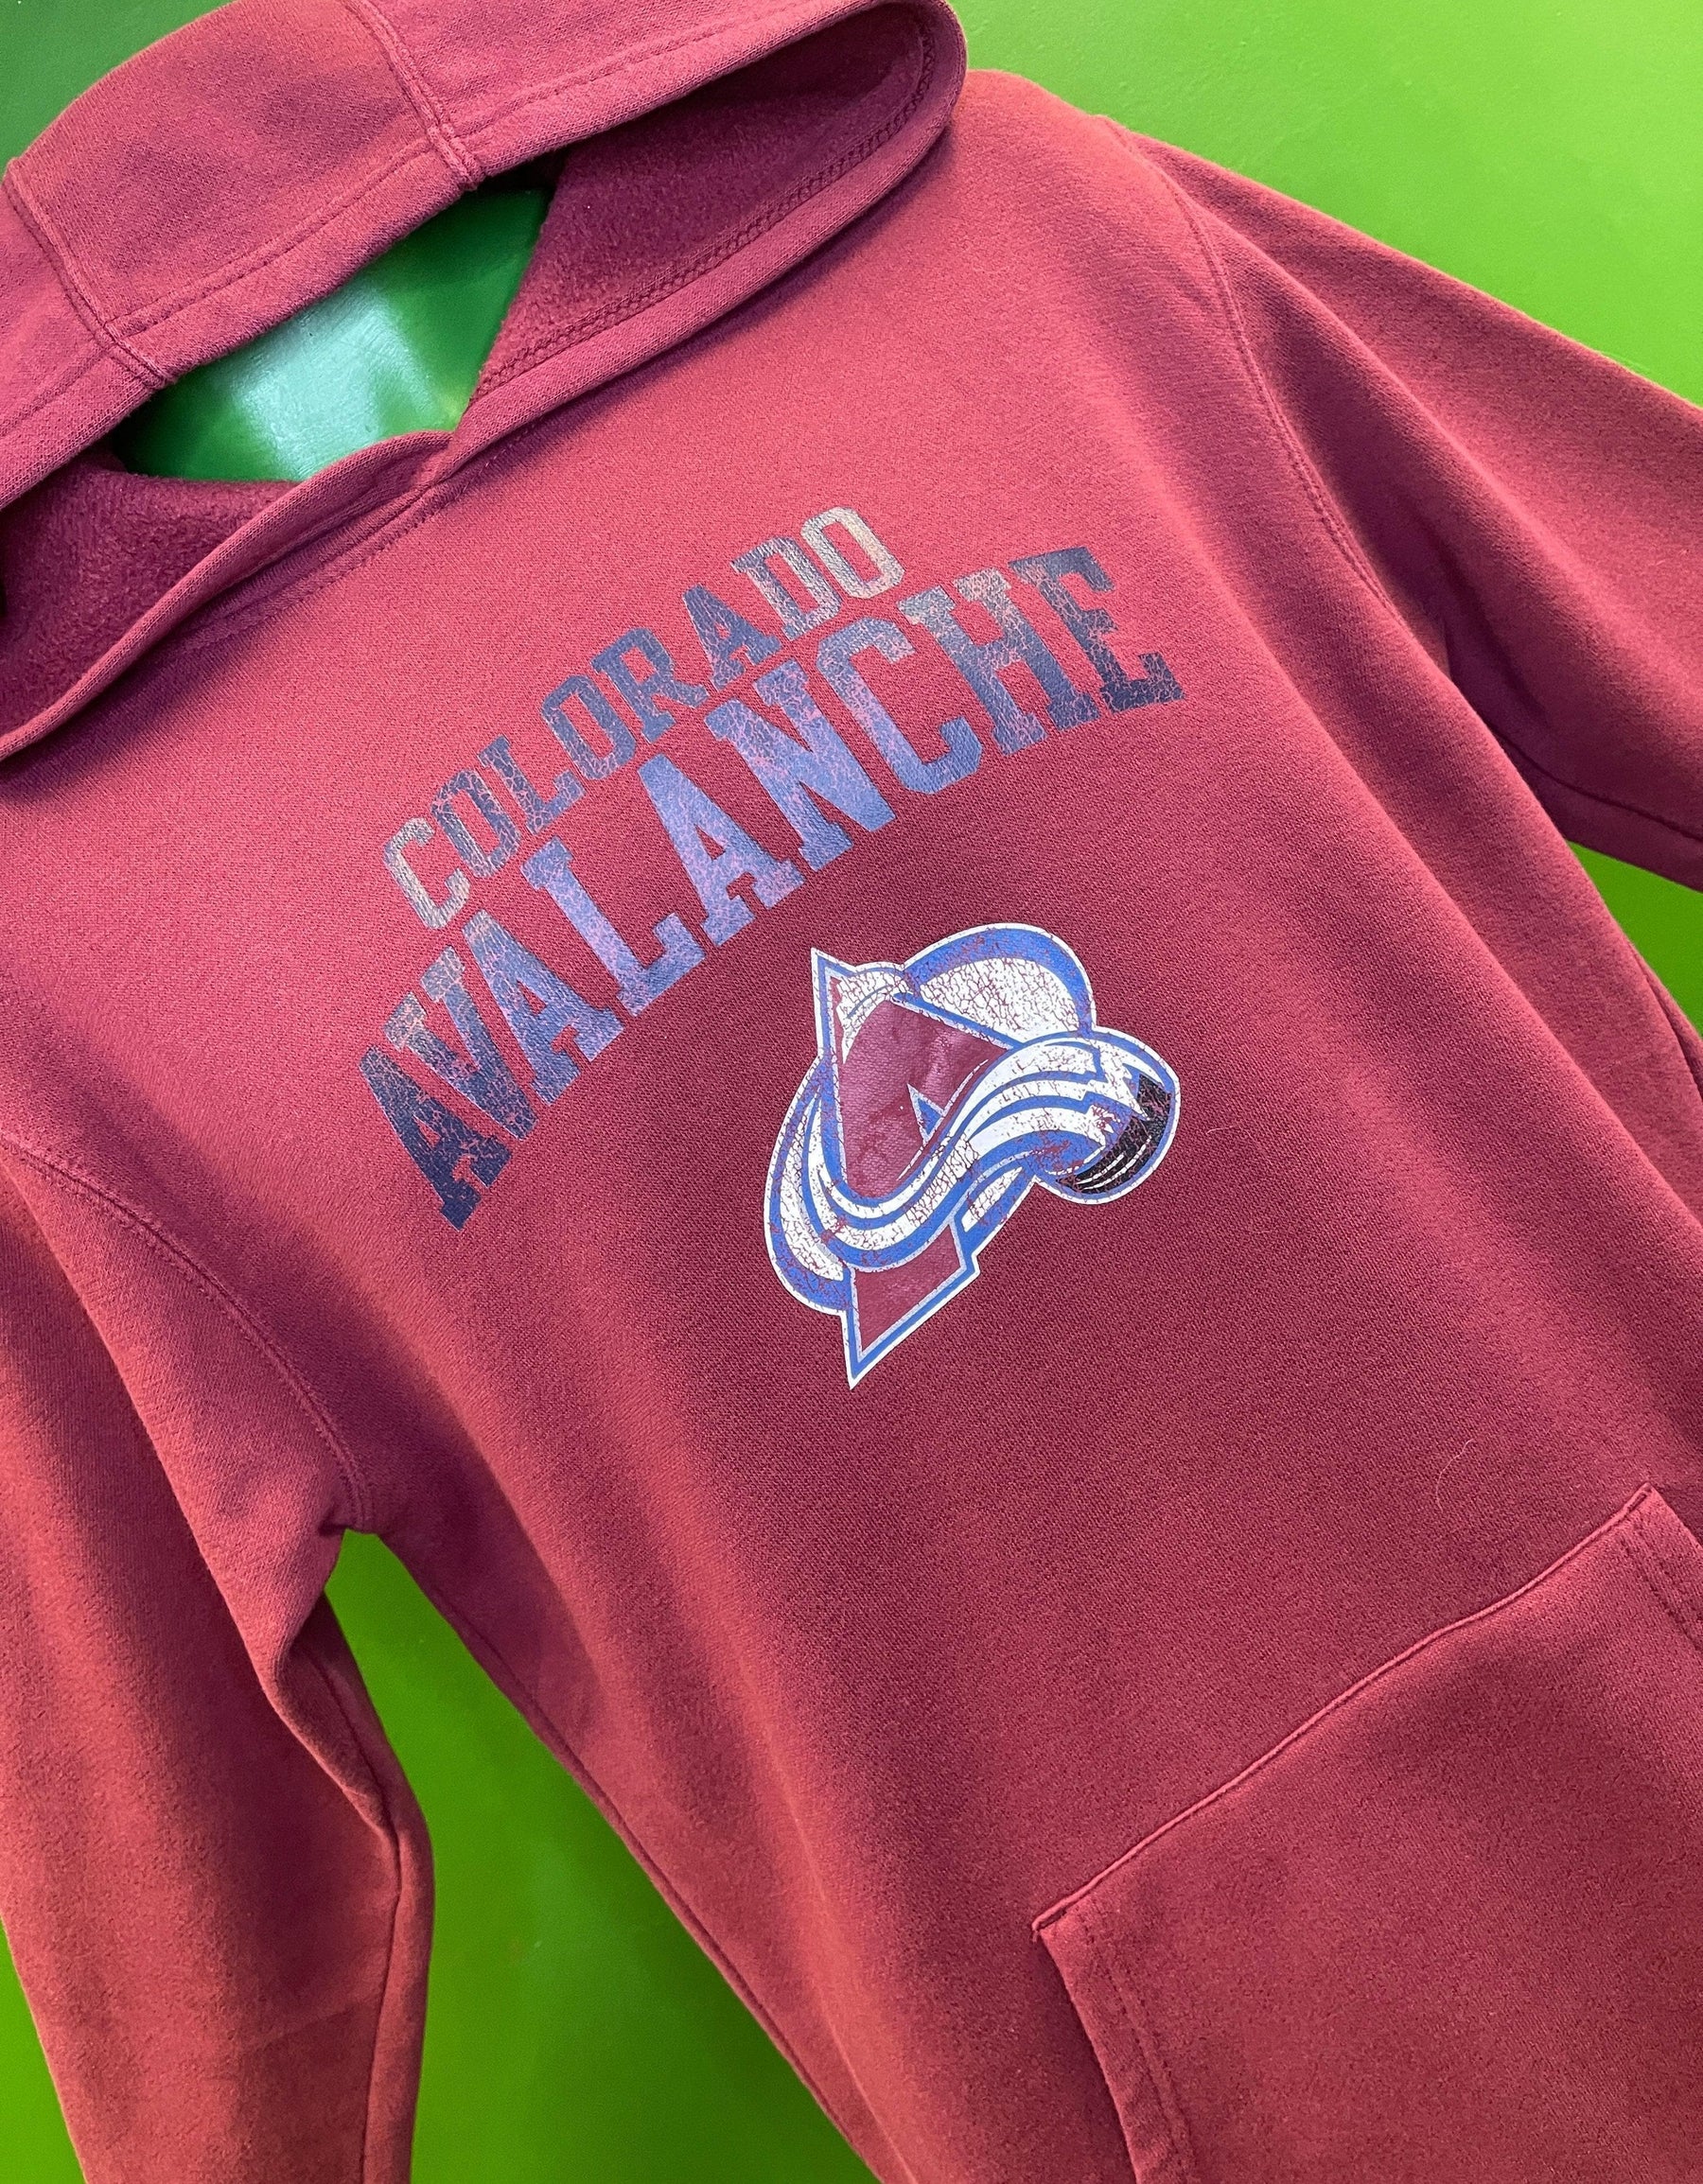 NHL Colorado Avalanche Reebok Pullover Hoodie Youth Large 14-16